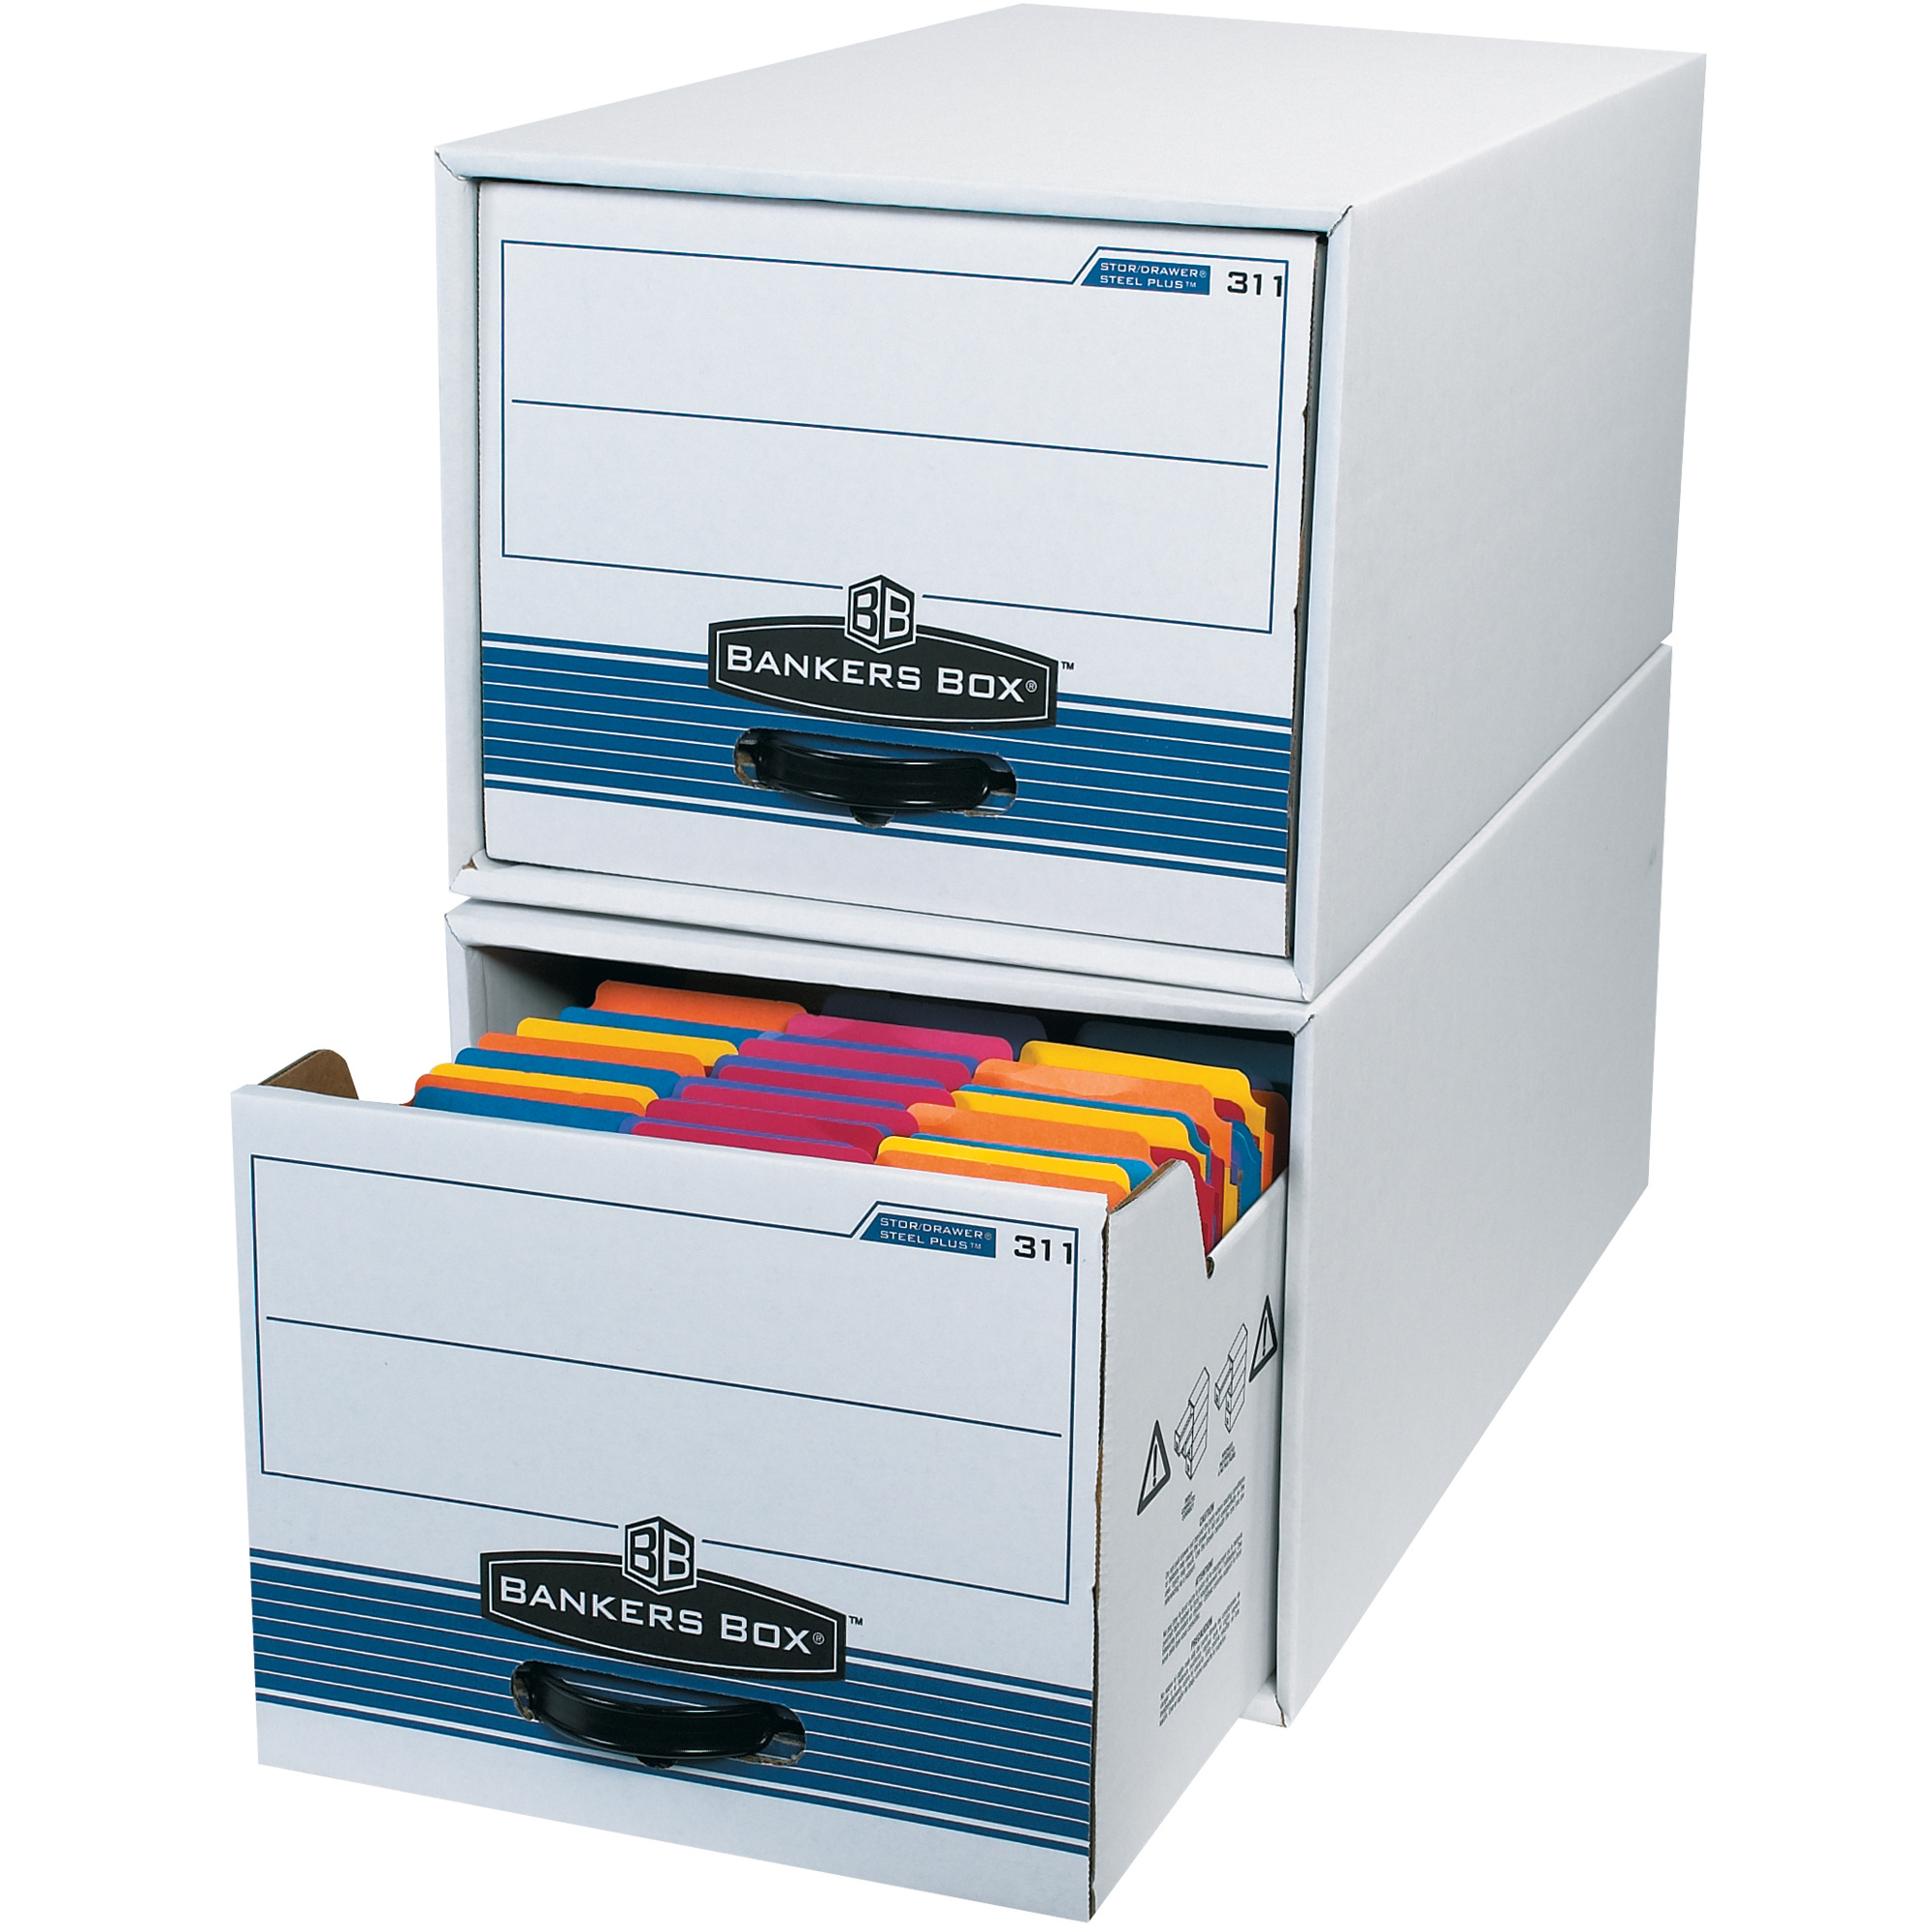 Bankers Box® Super Stor / Drawers - 24 x 12 x 10"  Letter Size - #FEL00721 image